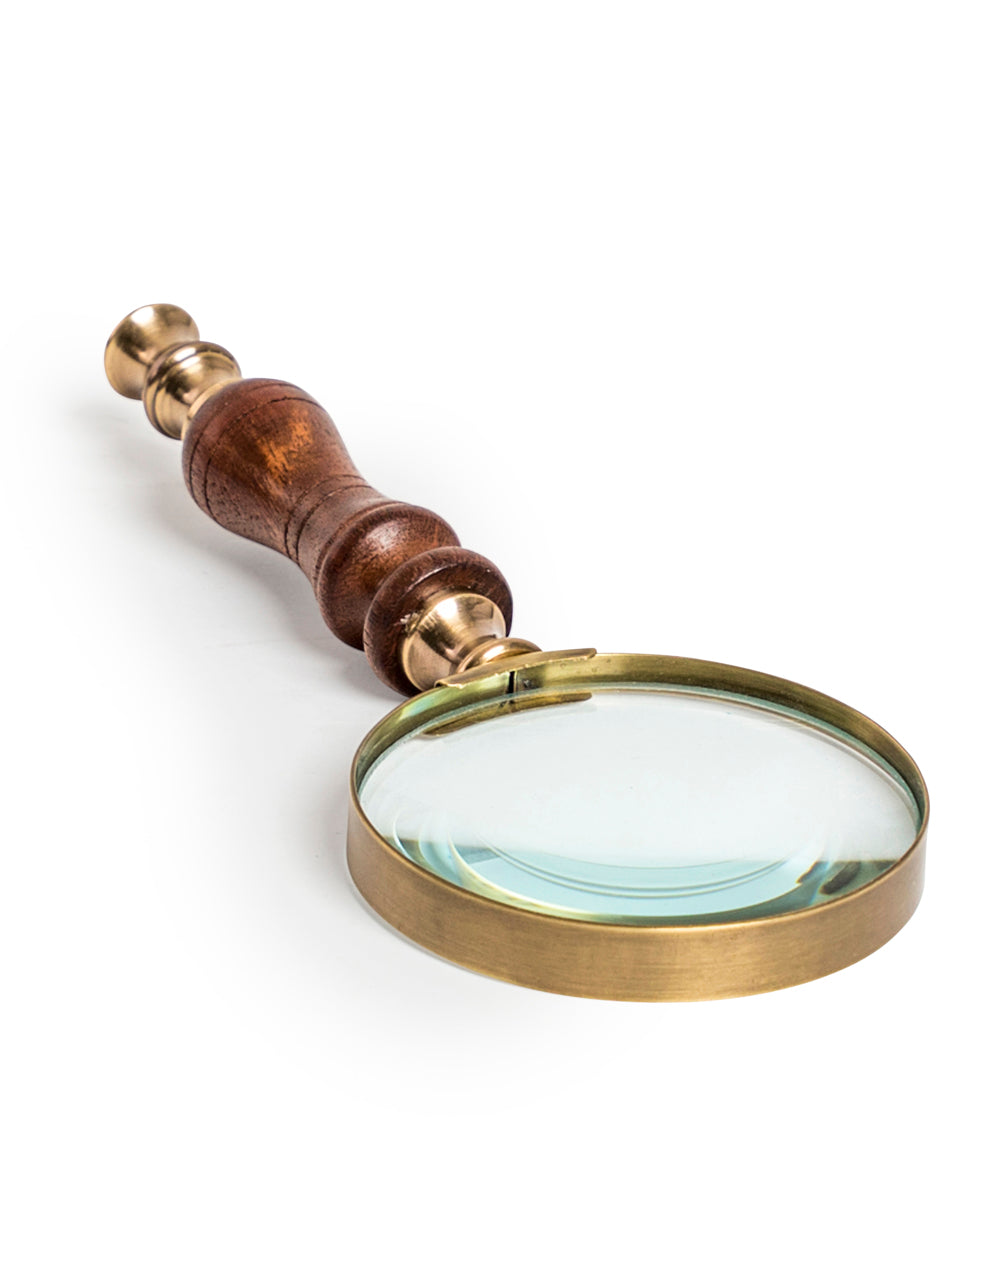 Antiqued Traditional Magnifying Glass with Wooden Handle